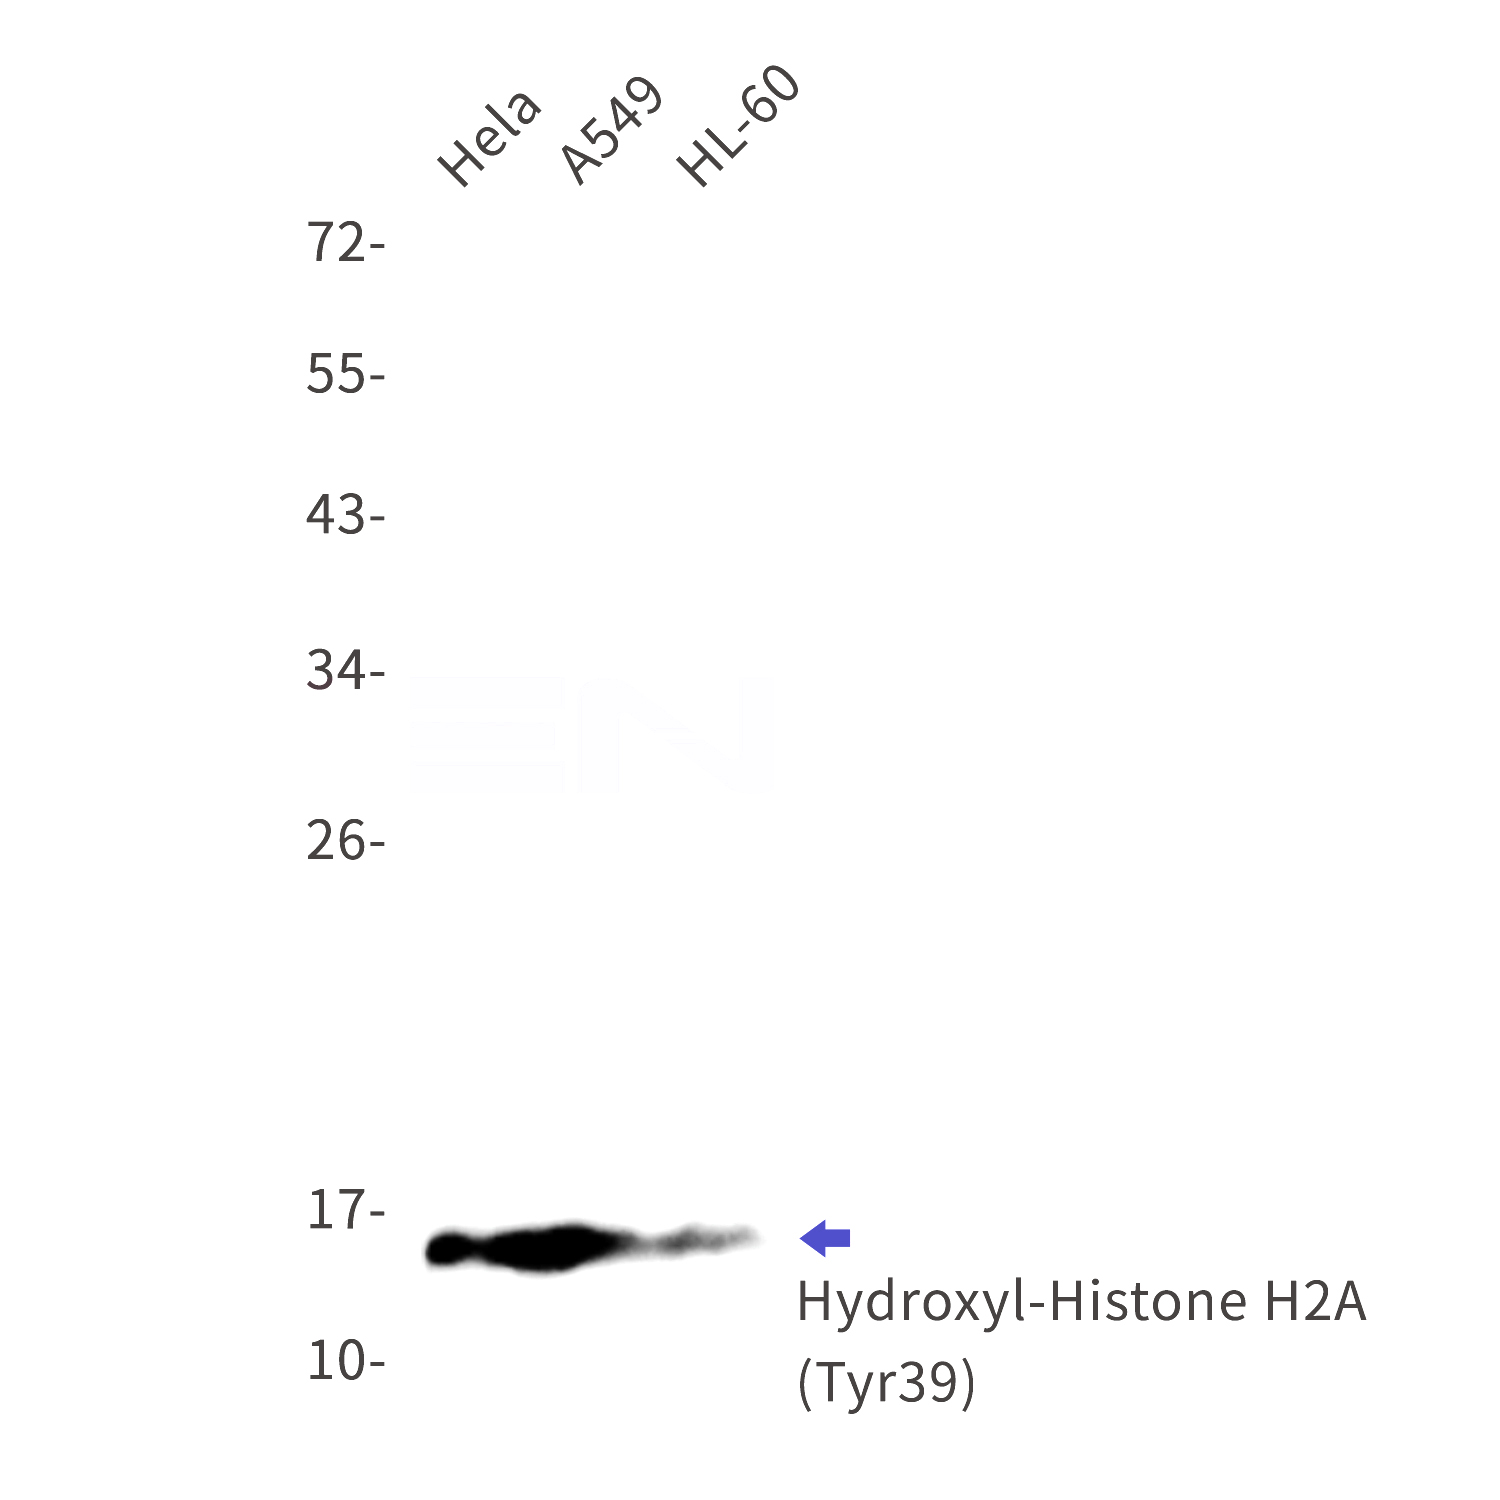 Western blot detection of Hydroxyl-Histone H2A (Tyr39) in Hela,A549,HL-60 cell lysates using Hydroxyl-Histone H2A (Tyr39) Rabbit mAb(1:1000 diluted).Observed band size:14kDa.